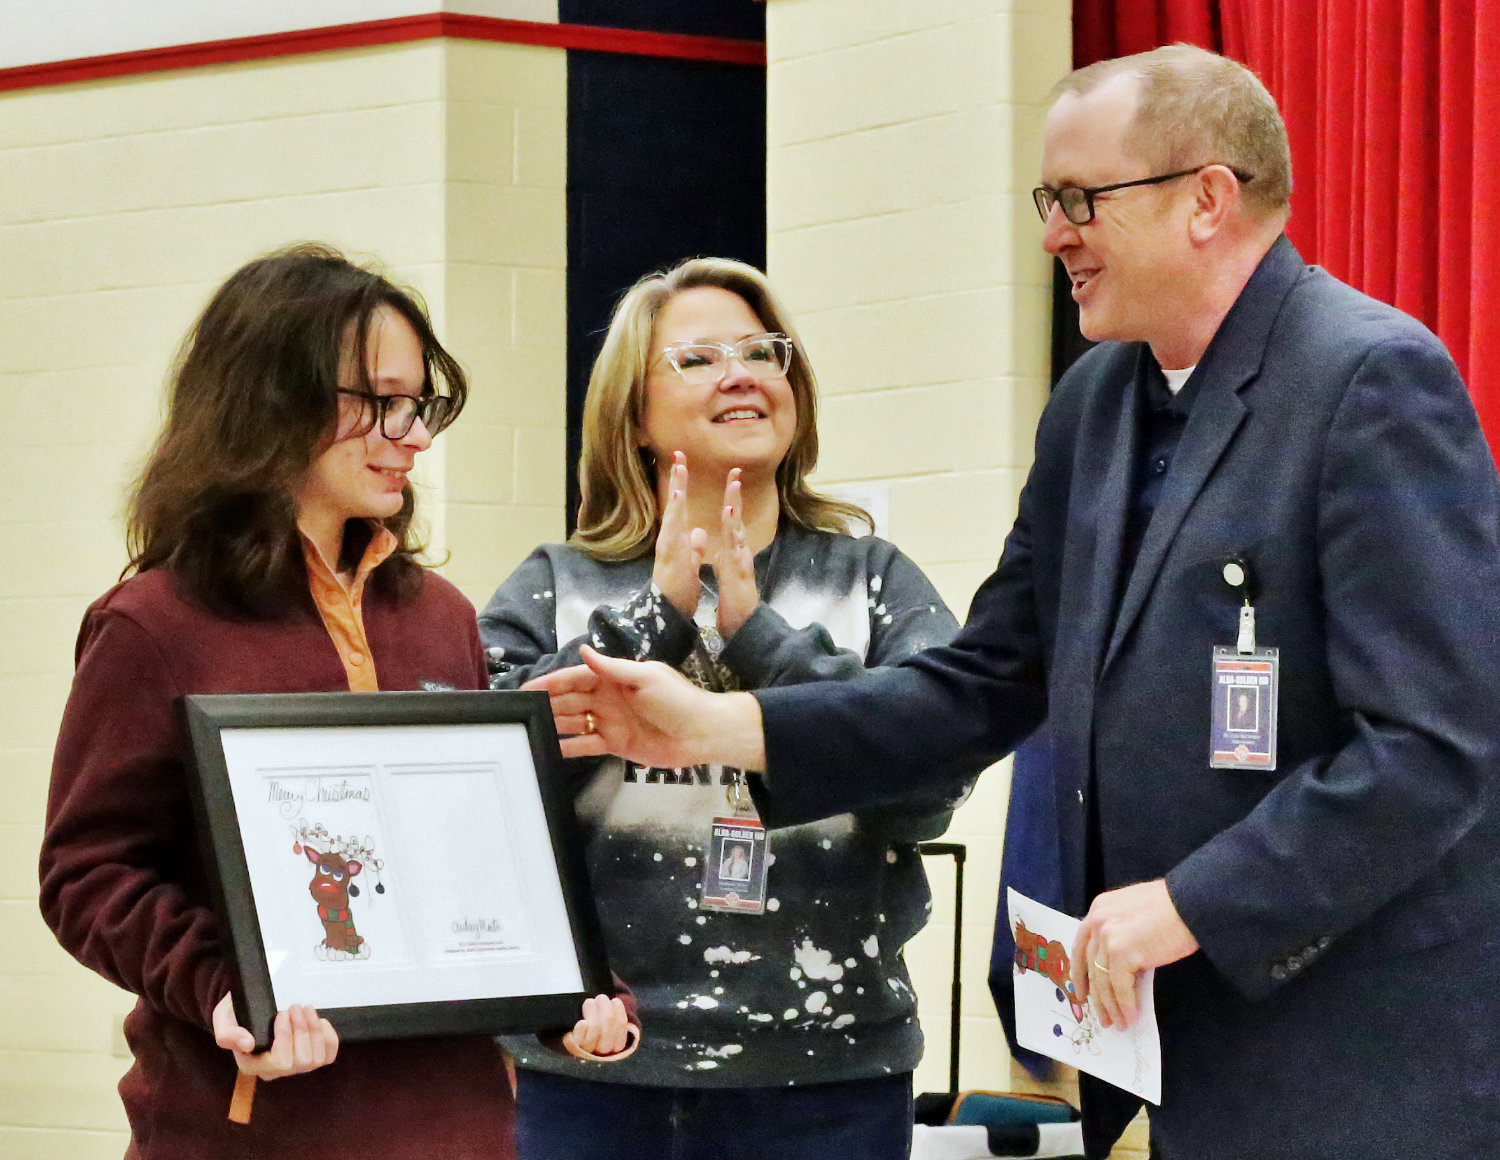 Audrey Martin, winner of the Alba-Golden schools 2021 Christmas card competition, receives an award from Superintendent Cole McClendon at Monday’s school board meeting. Pictured with Martin is art teacher Stephanie White.